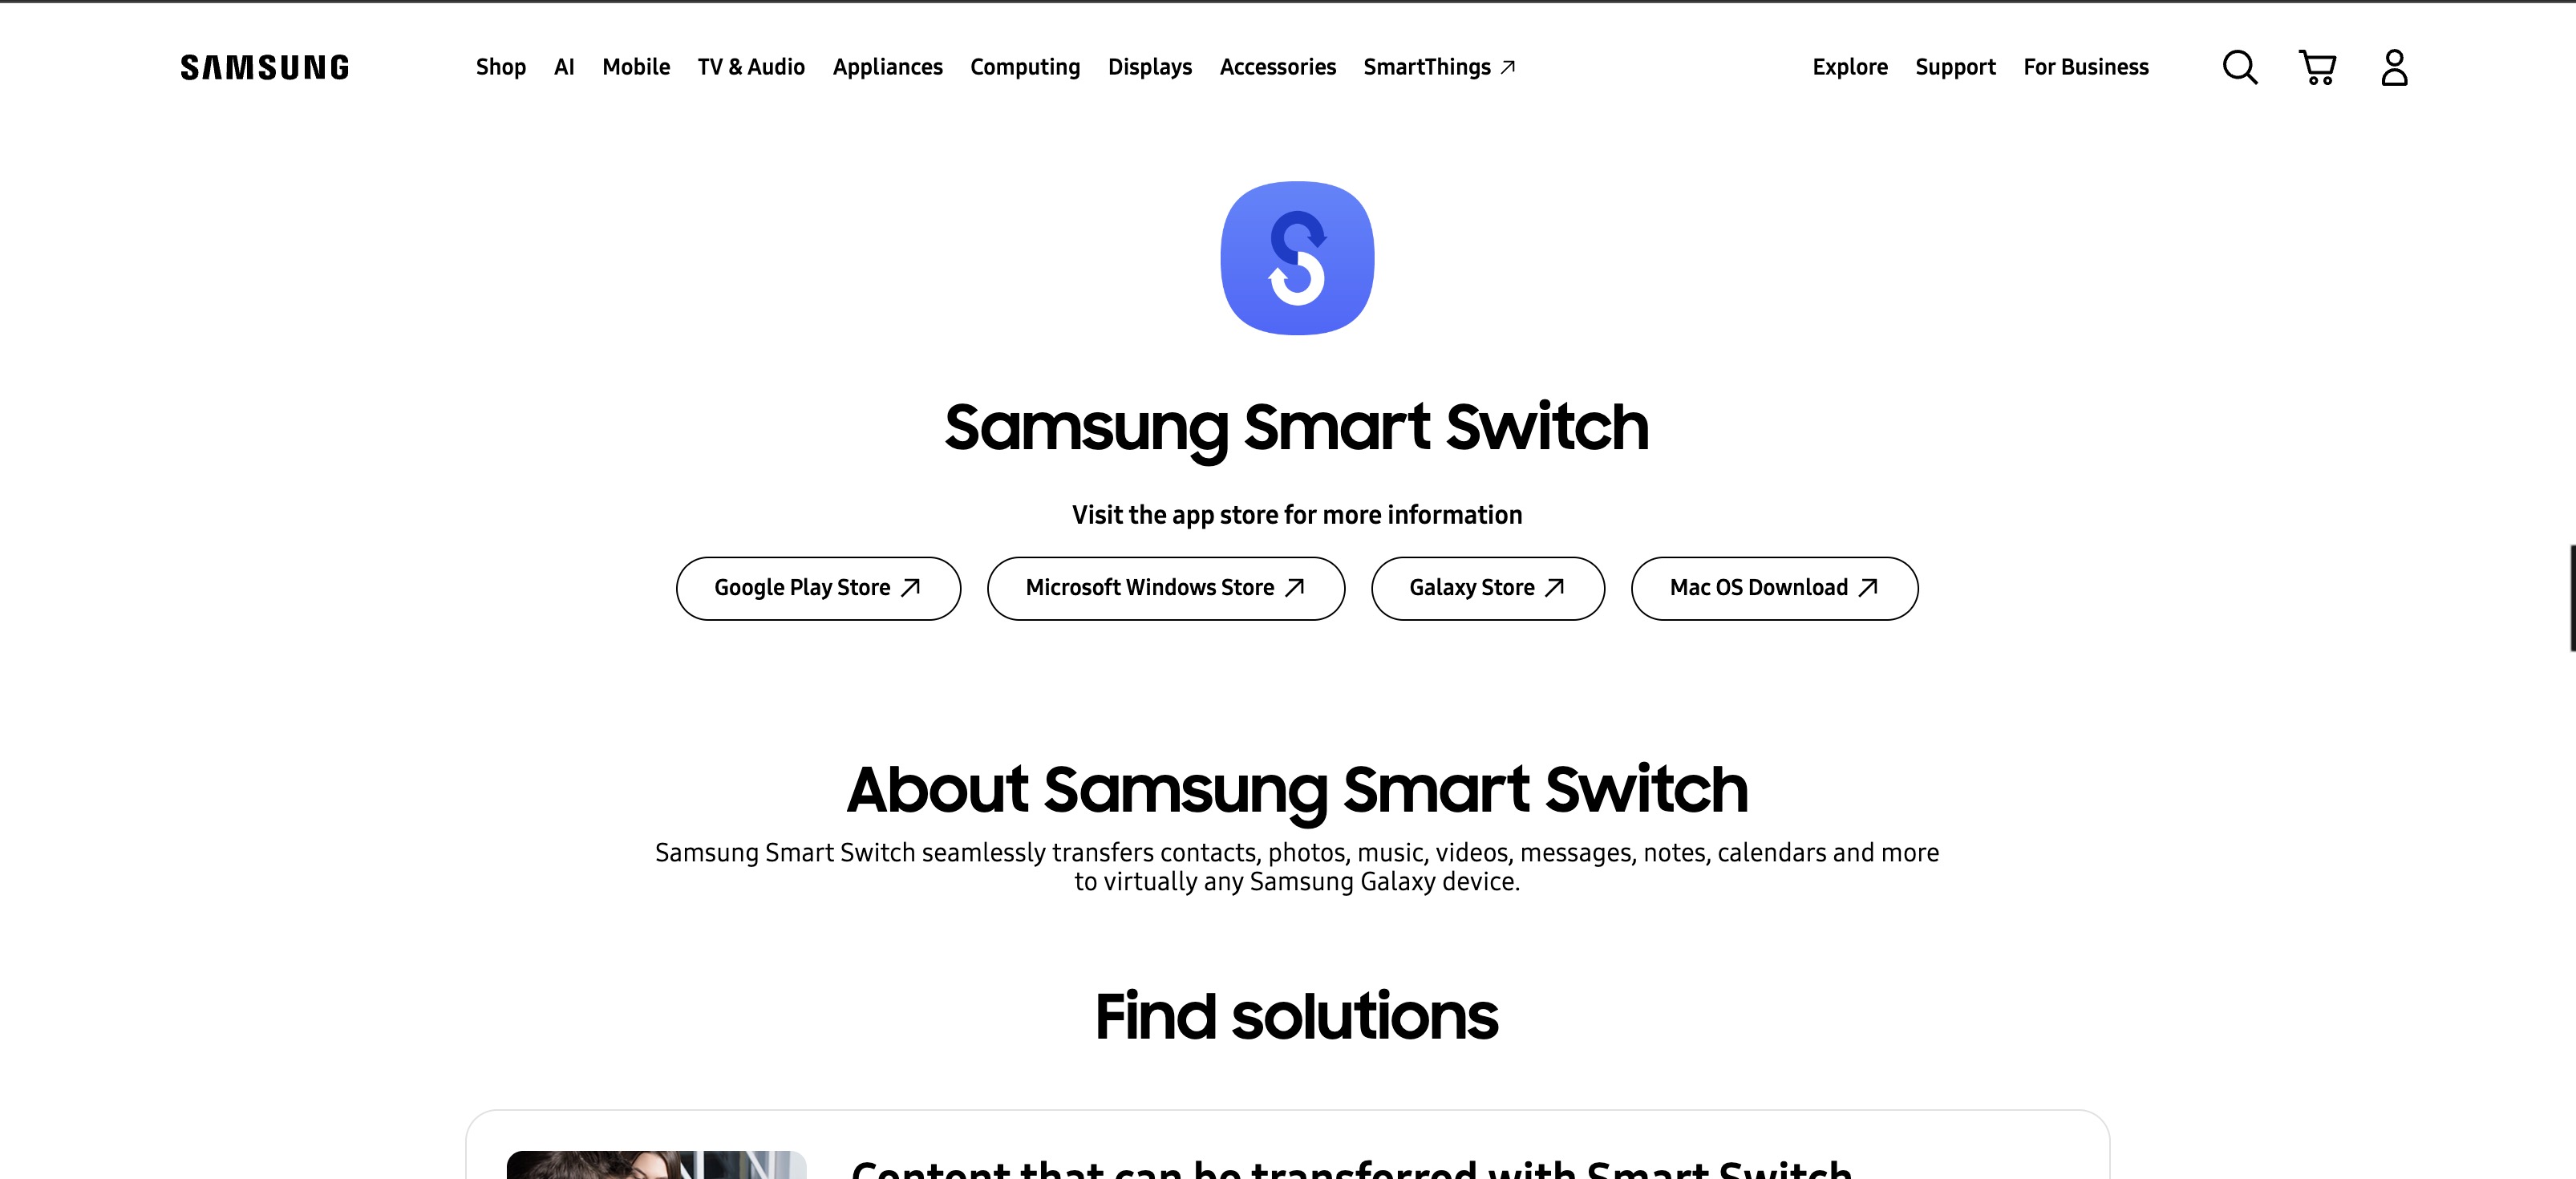 Samsung Smart Switch review: the ultimate tool for seamless device transition